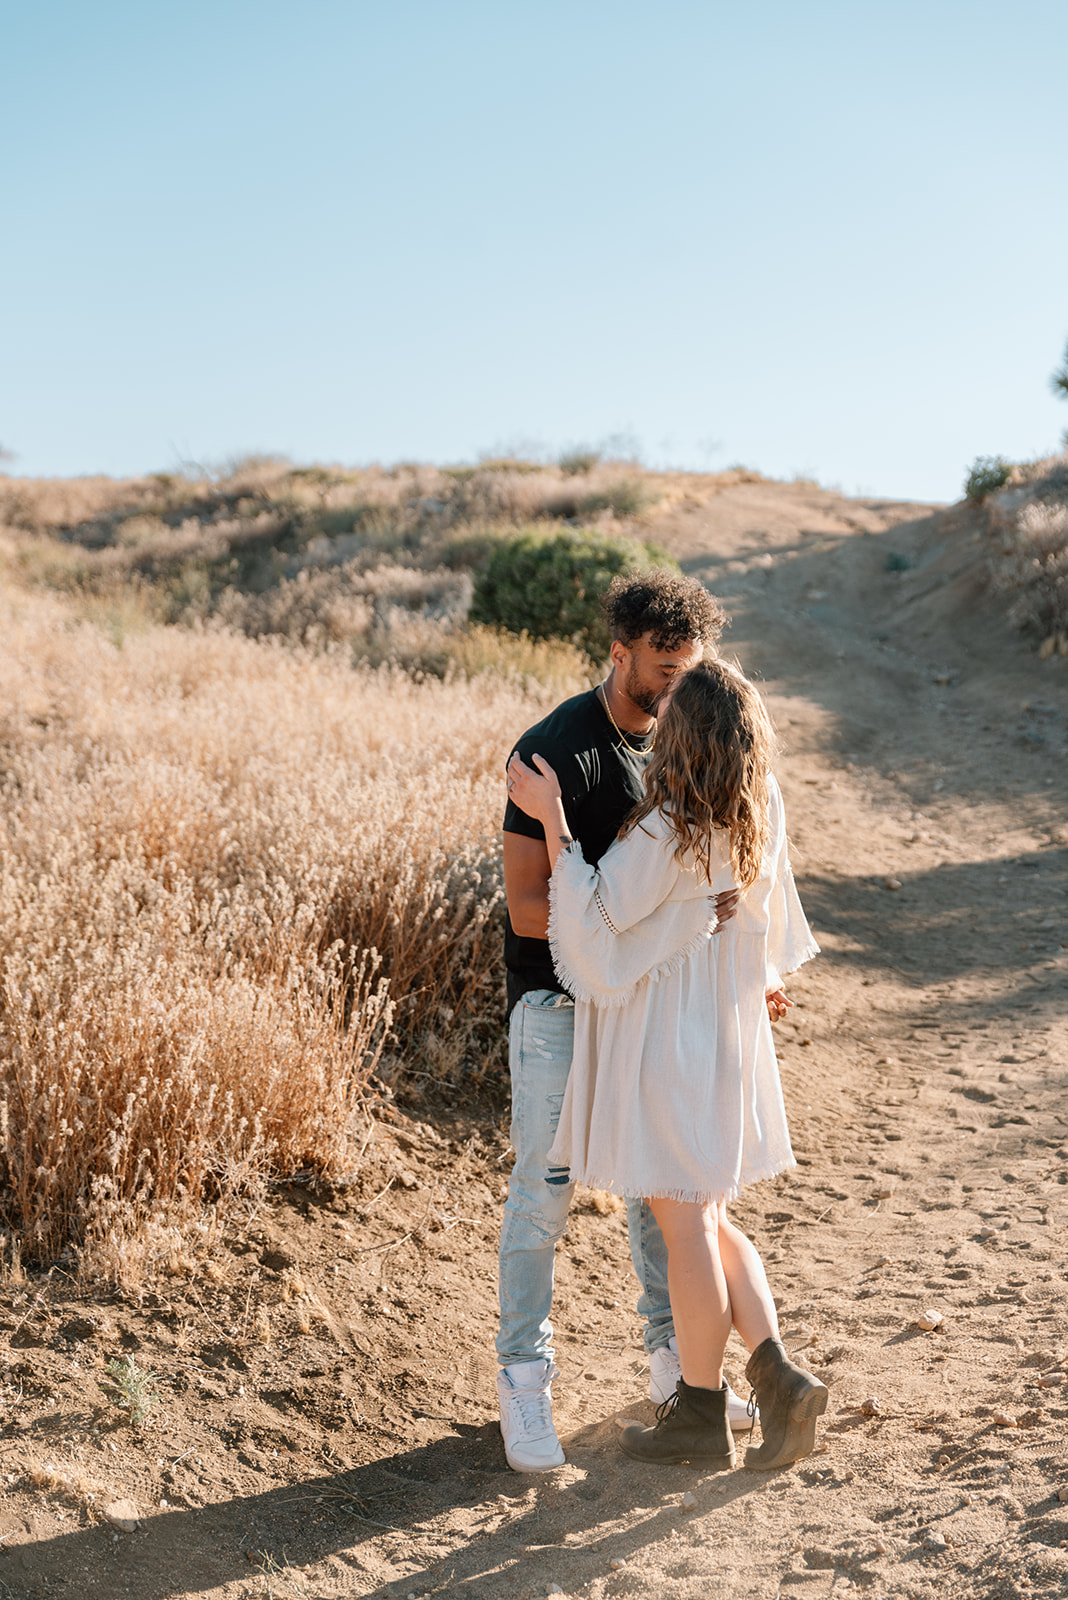 Stealing a quiet moment with the couple in the desert Palm Springs engagement photographer